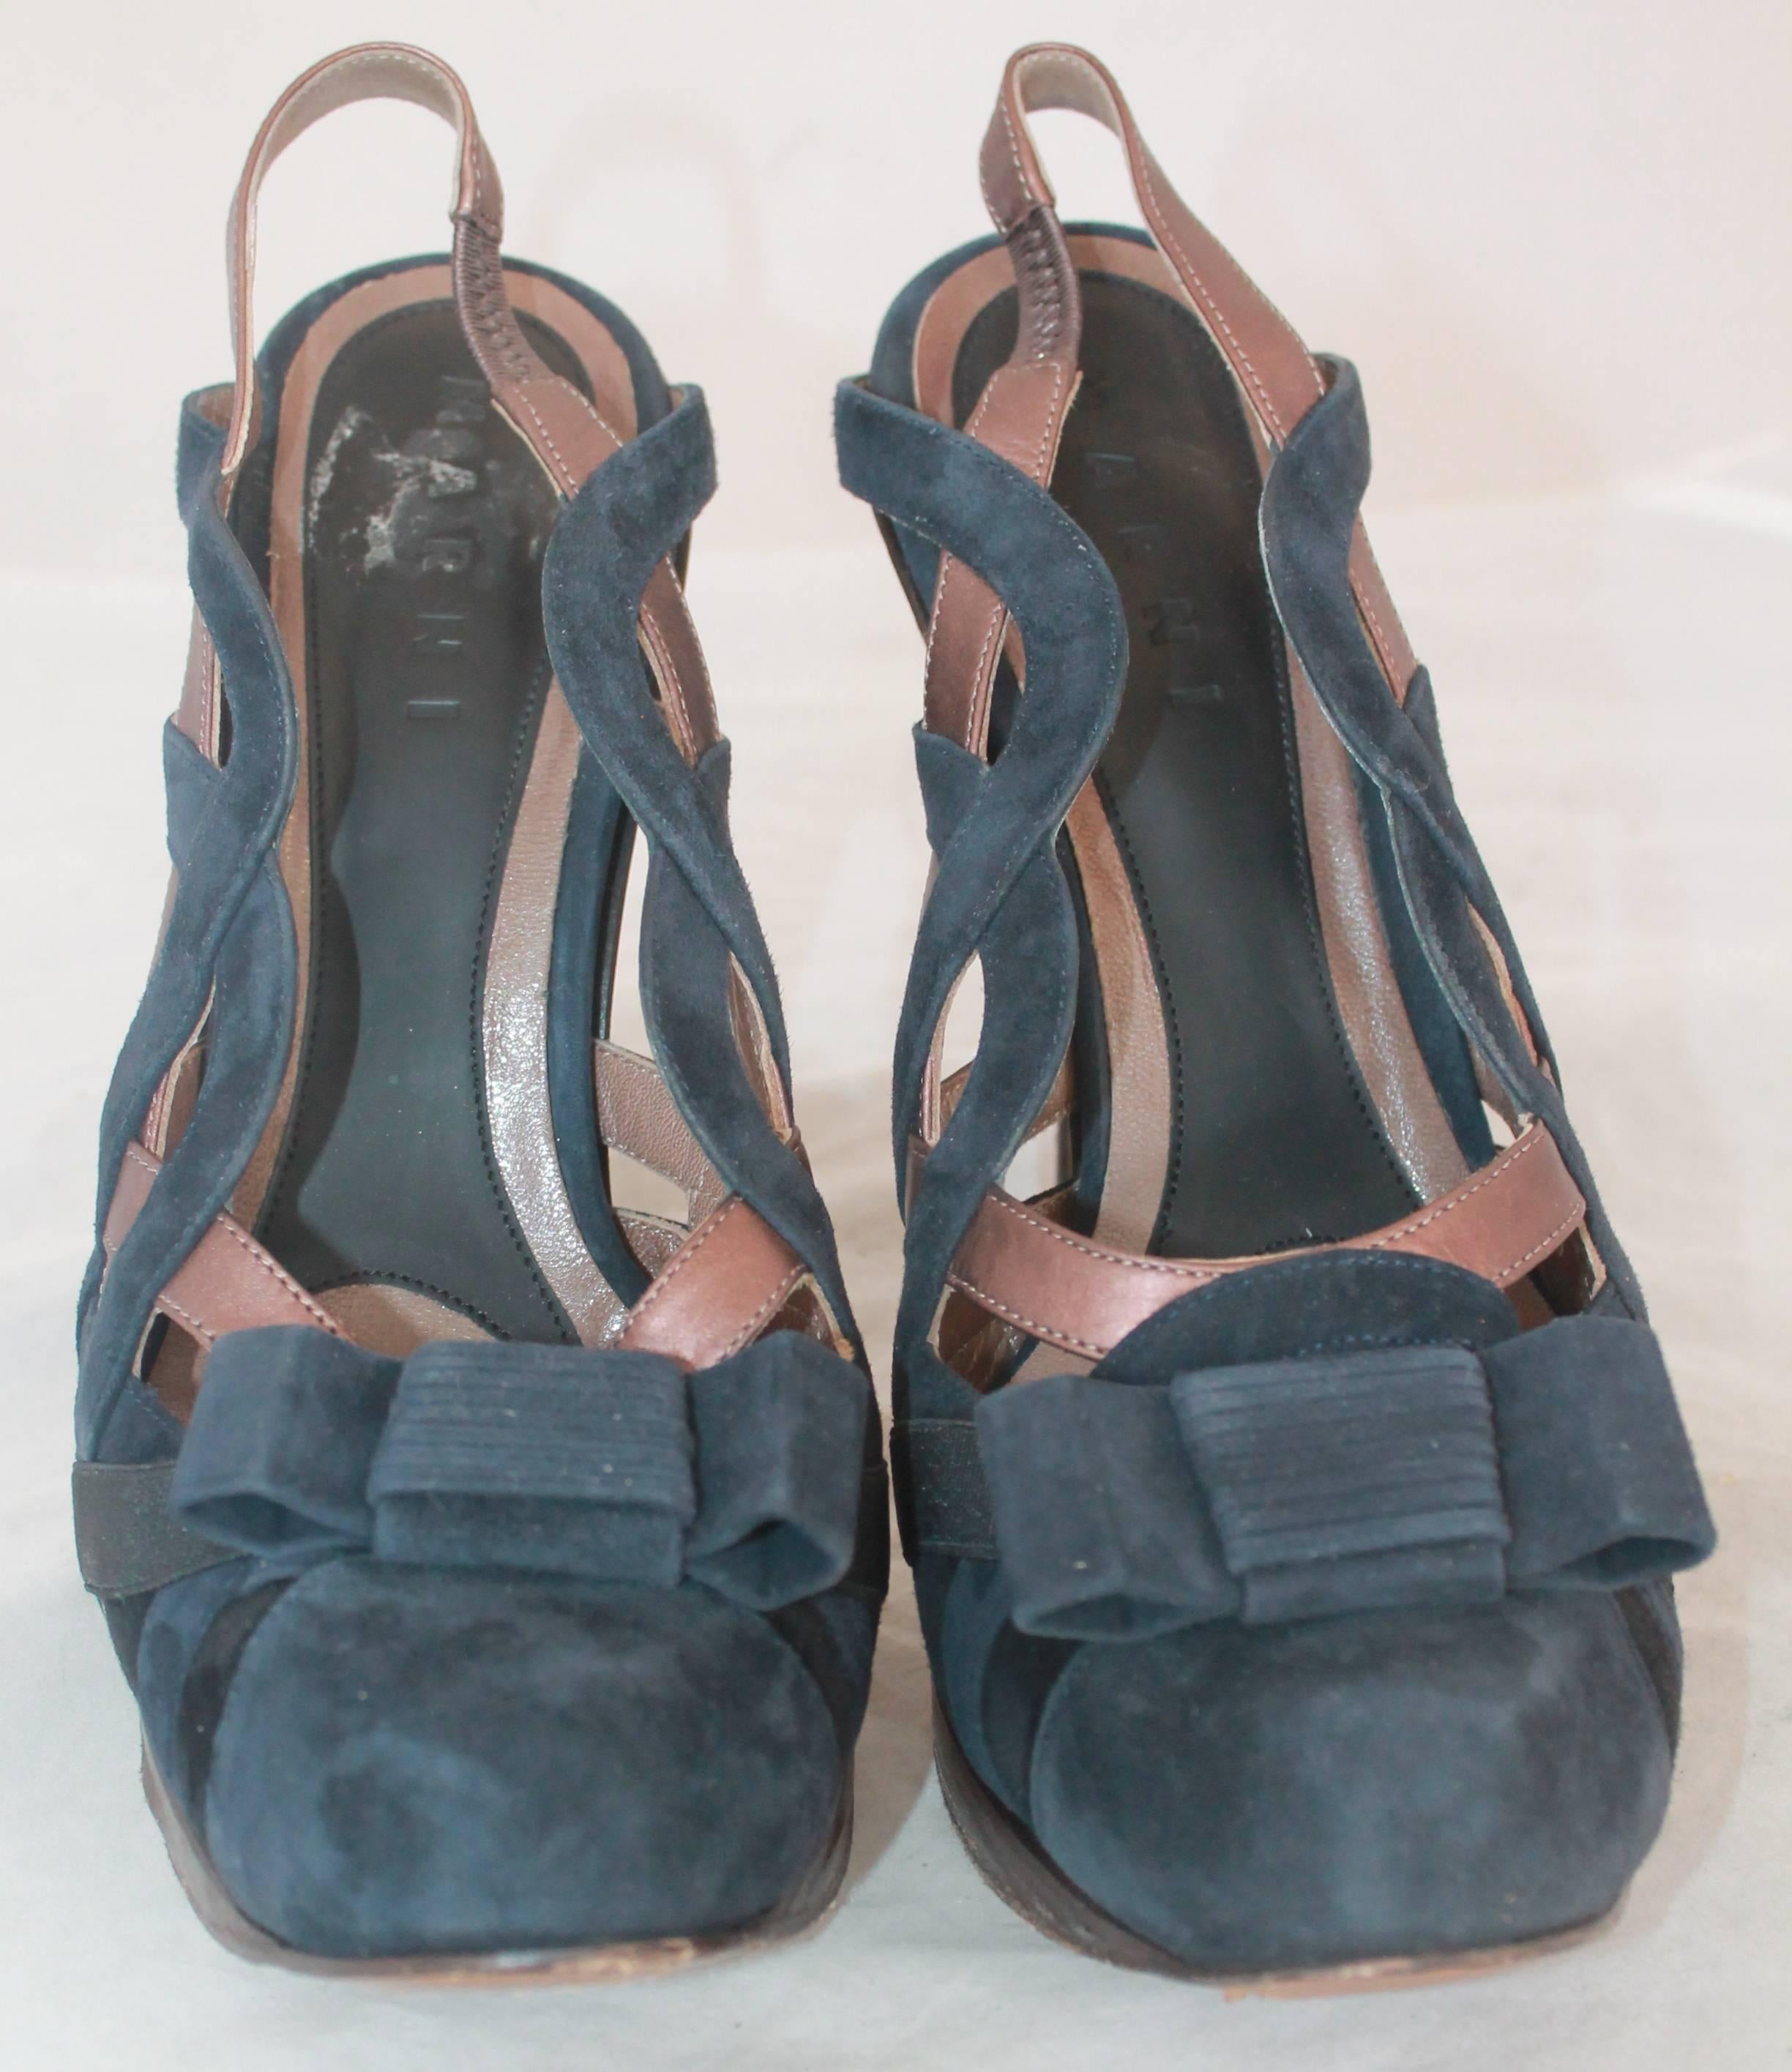 Black Marni Navy & Brown Woven Suede Pumps w/ Slingback Strap & Removable Bows - 40